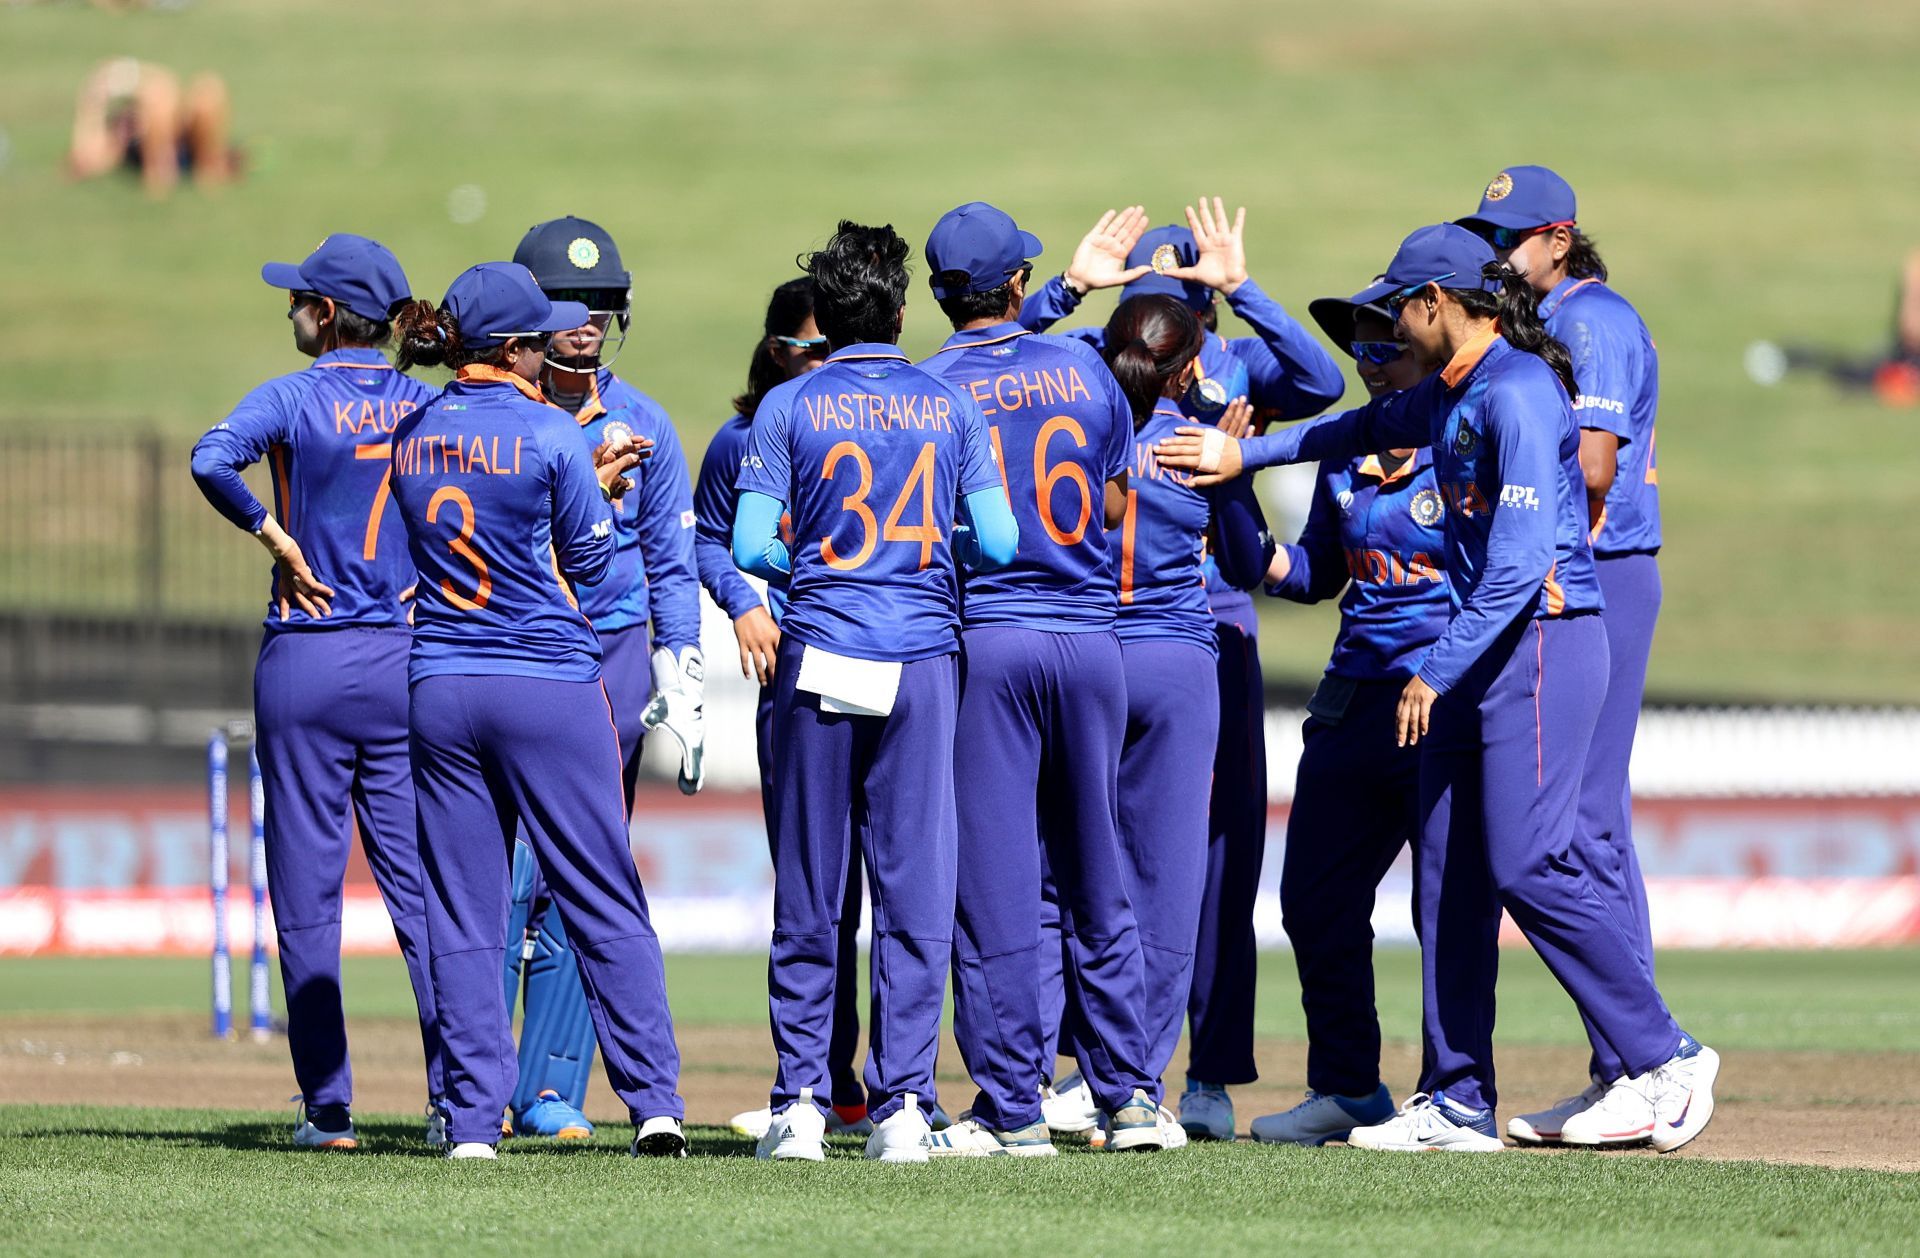 Veda Krishnamurthy has backed Team India to go deep into the tournament. (P.C.:Getty)